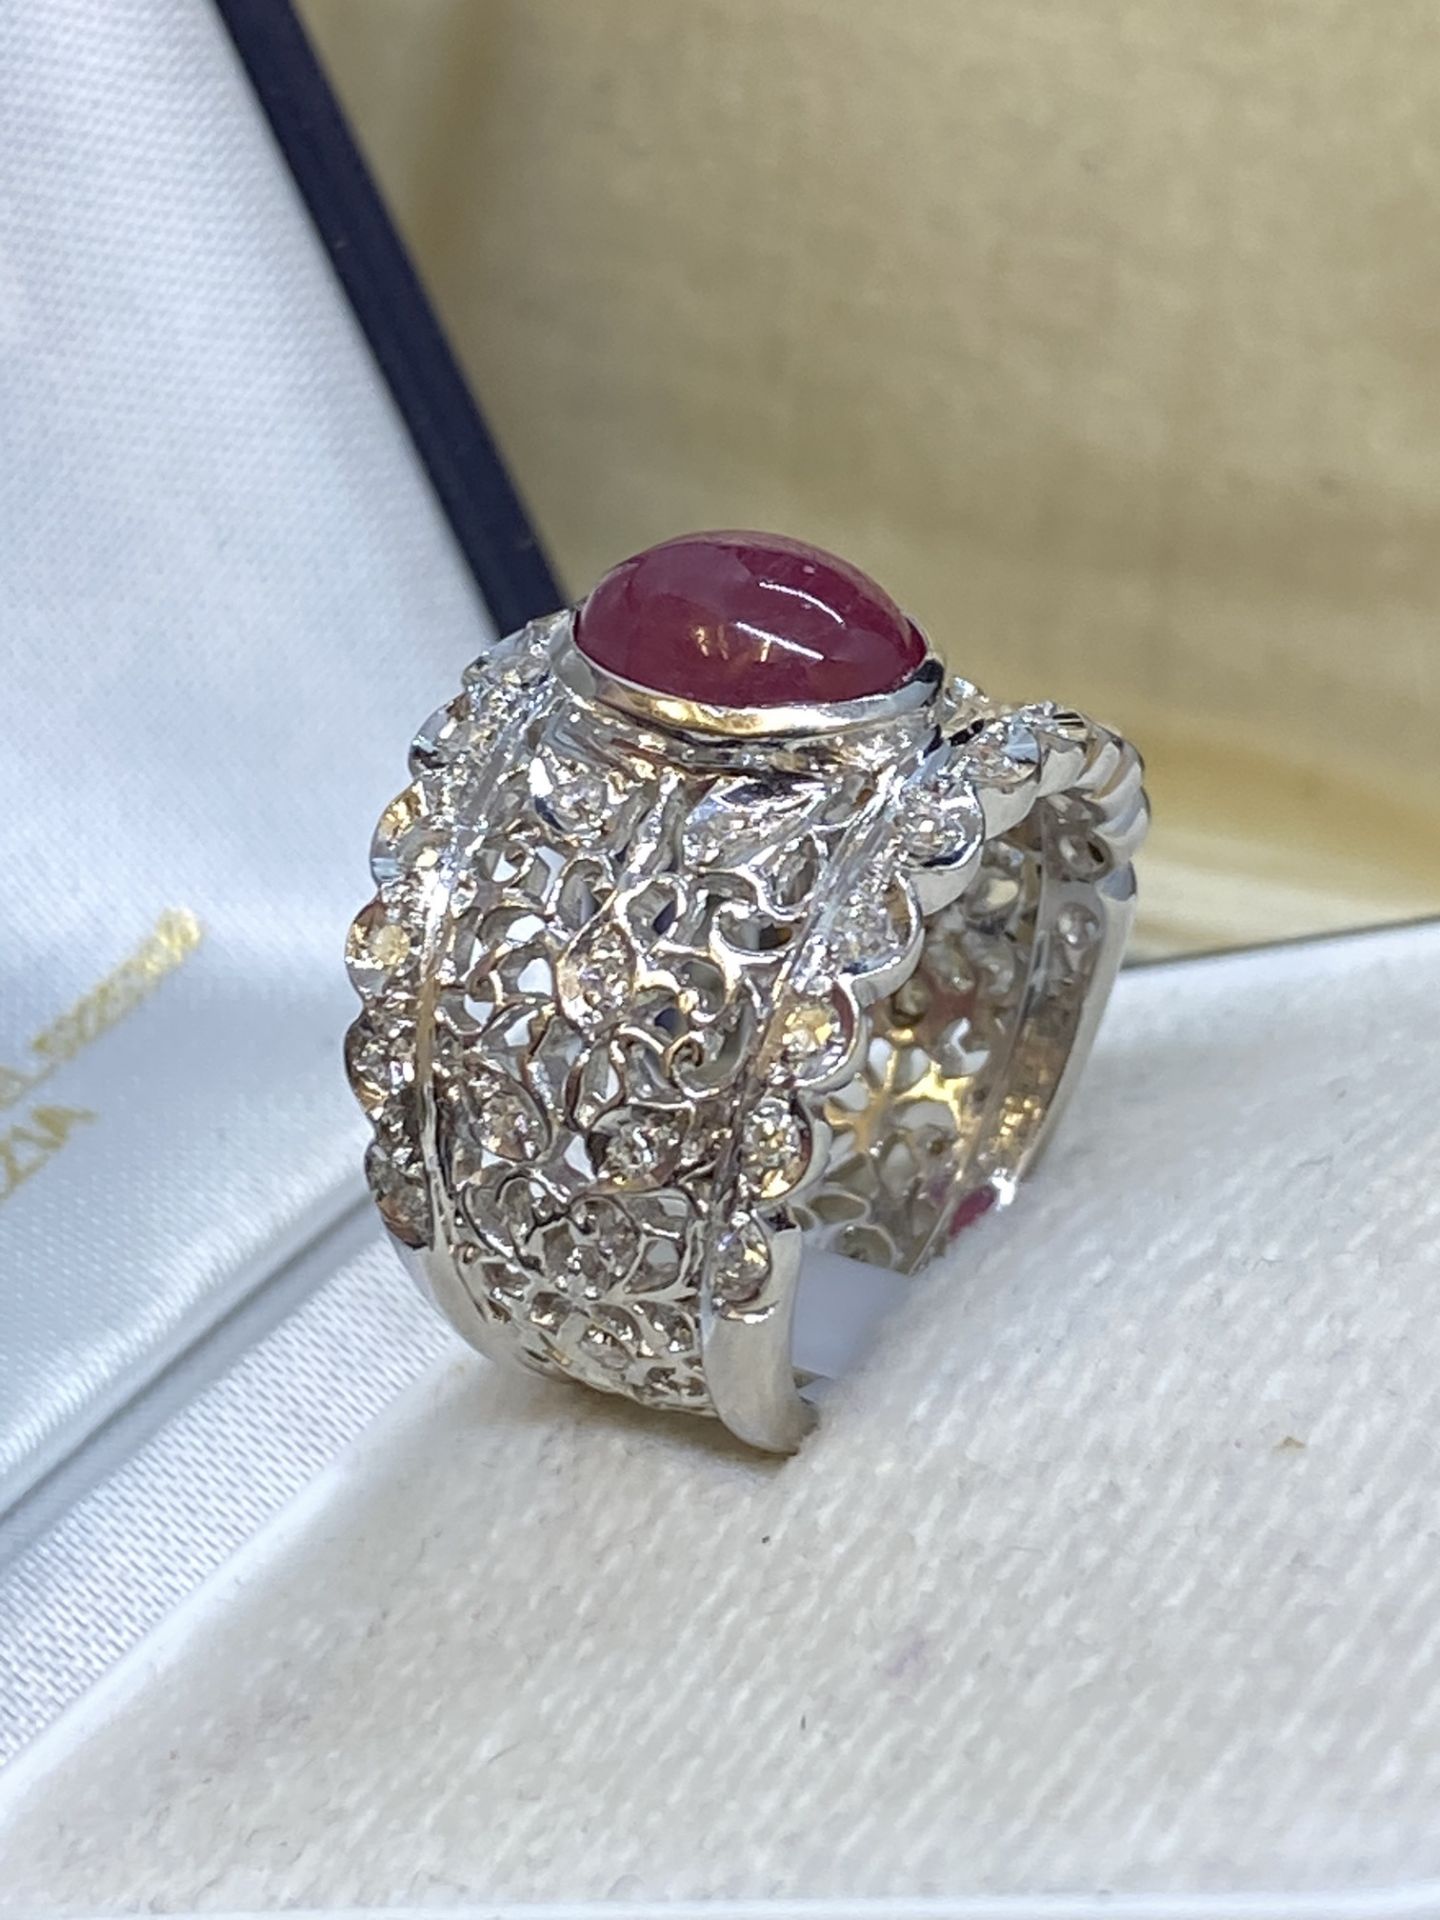 18ct WHITE GOLD 2.00ct CABACHON RUBY & 0.60ct DIAMOND RING - 10 GRAMS - Image 2 of 3